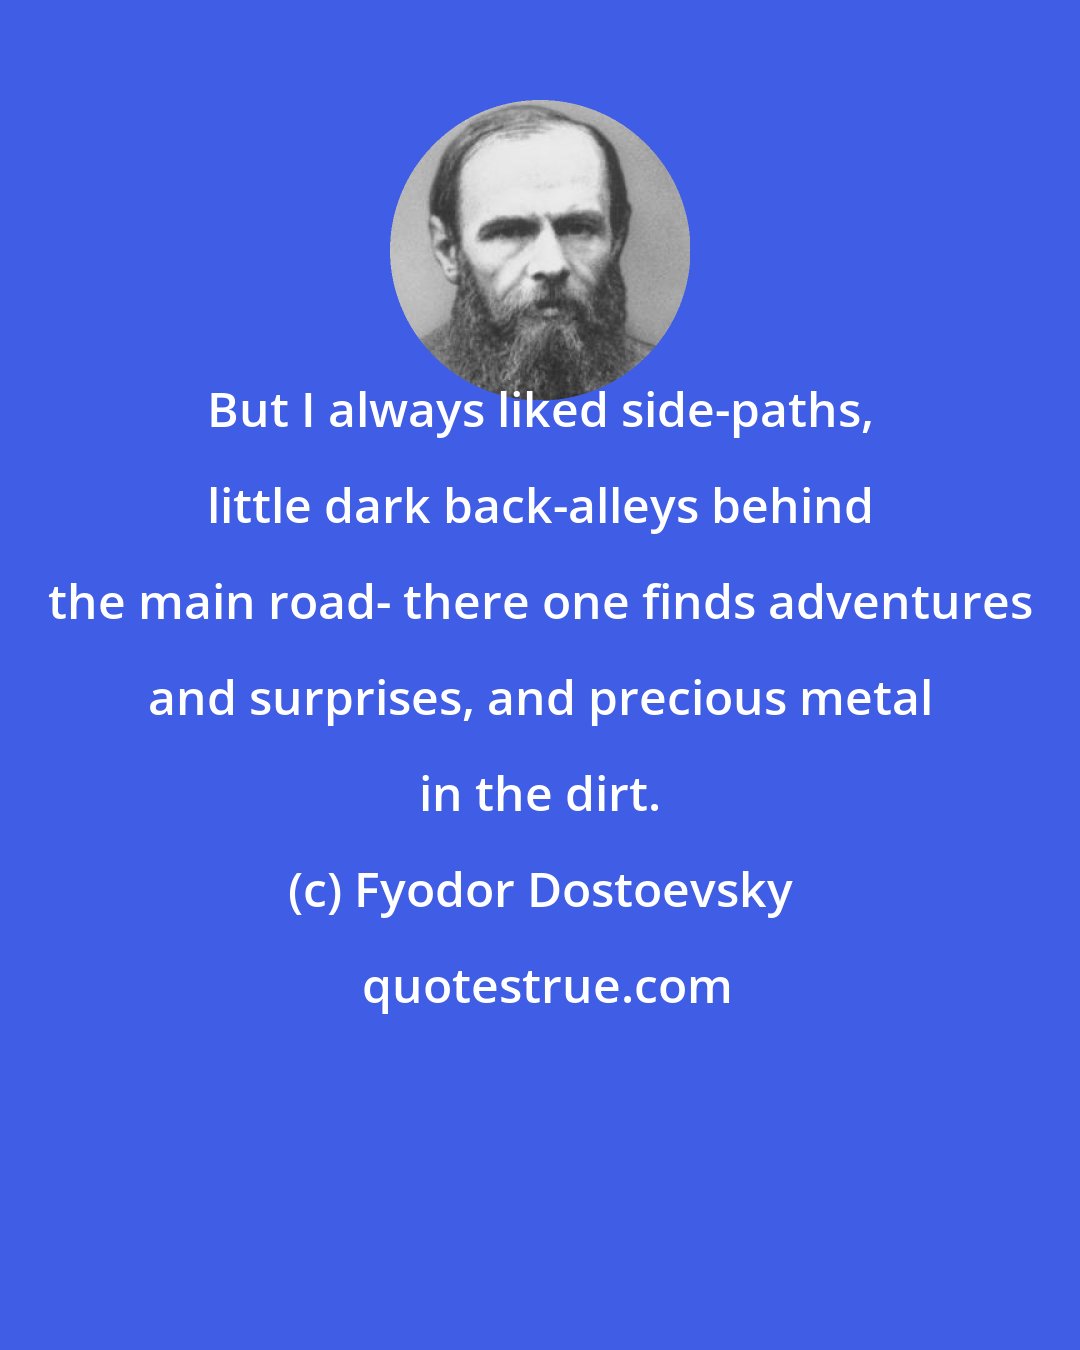 Fyodor Dostoevsky: But I always liked side-paths, little dark back-alleys behind the main road- there one finds adventures and surprises, and precious metal in the dirt.